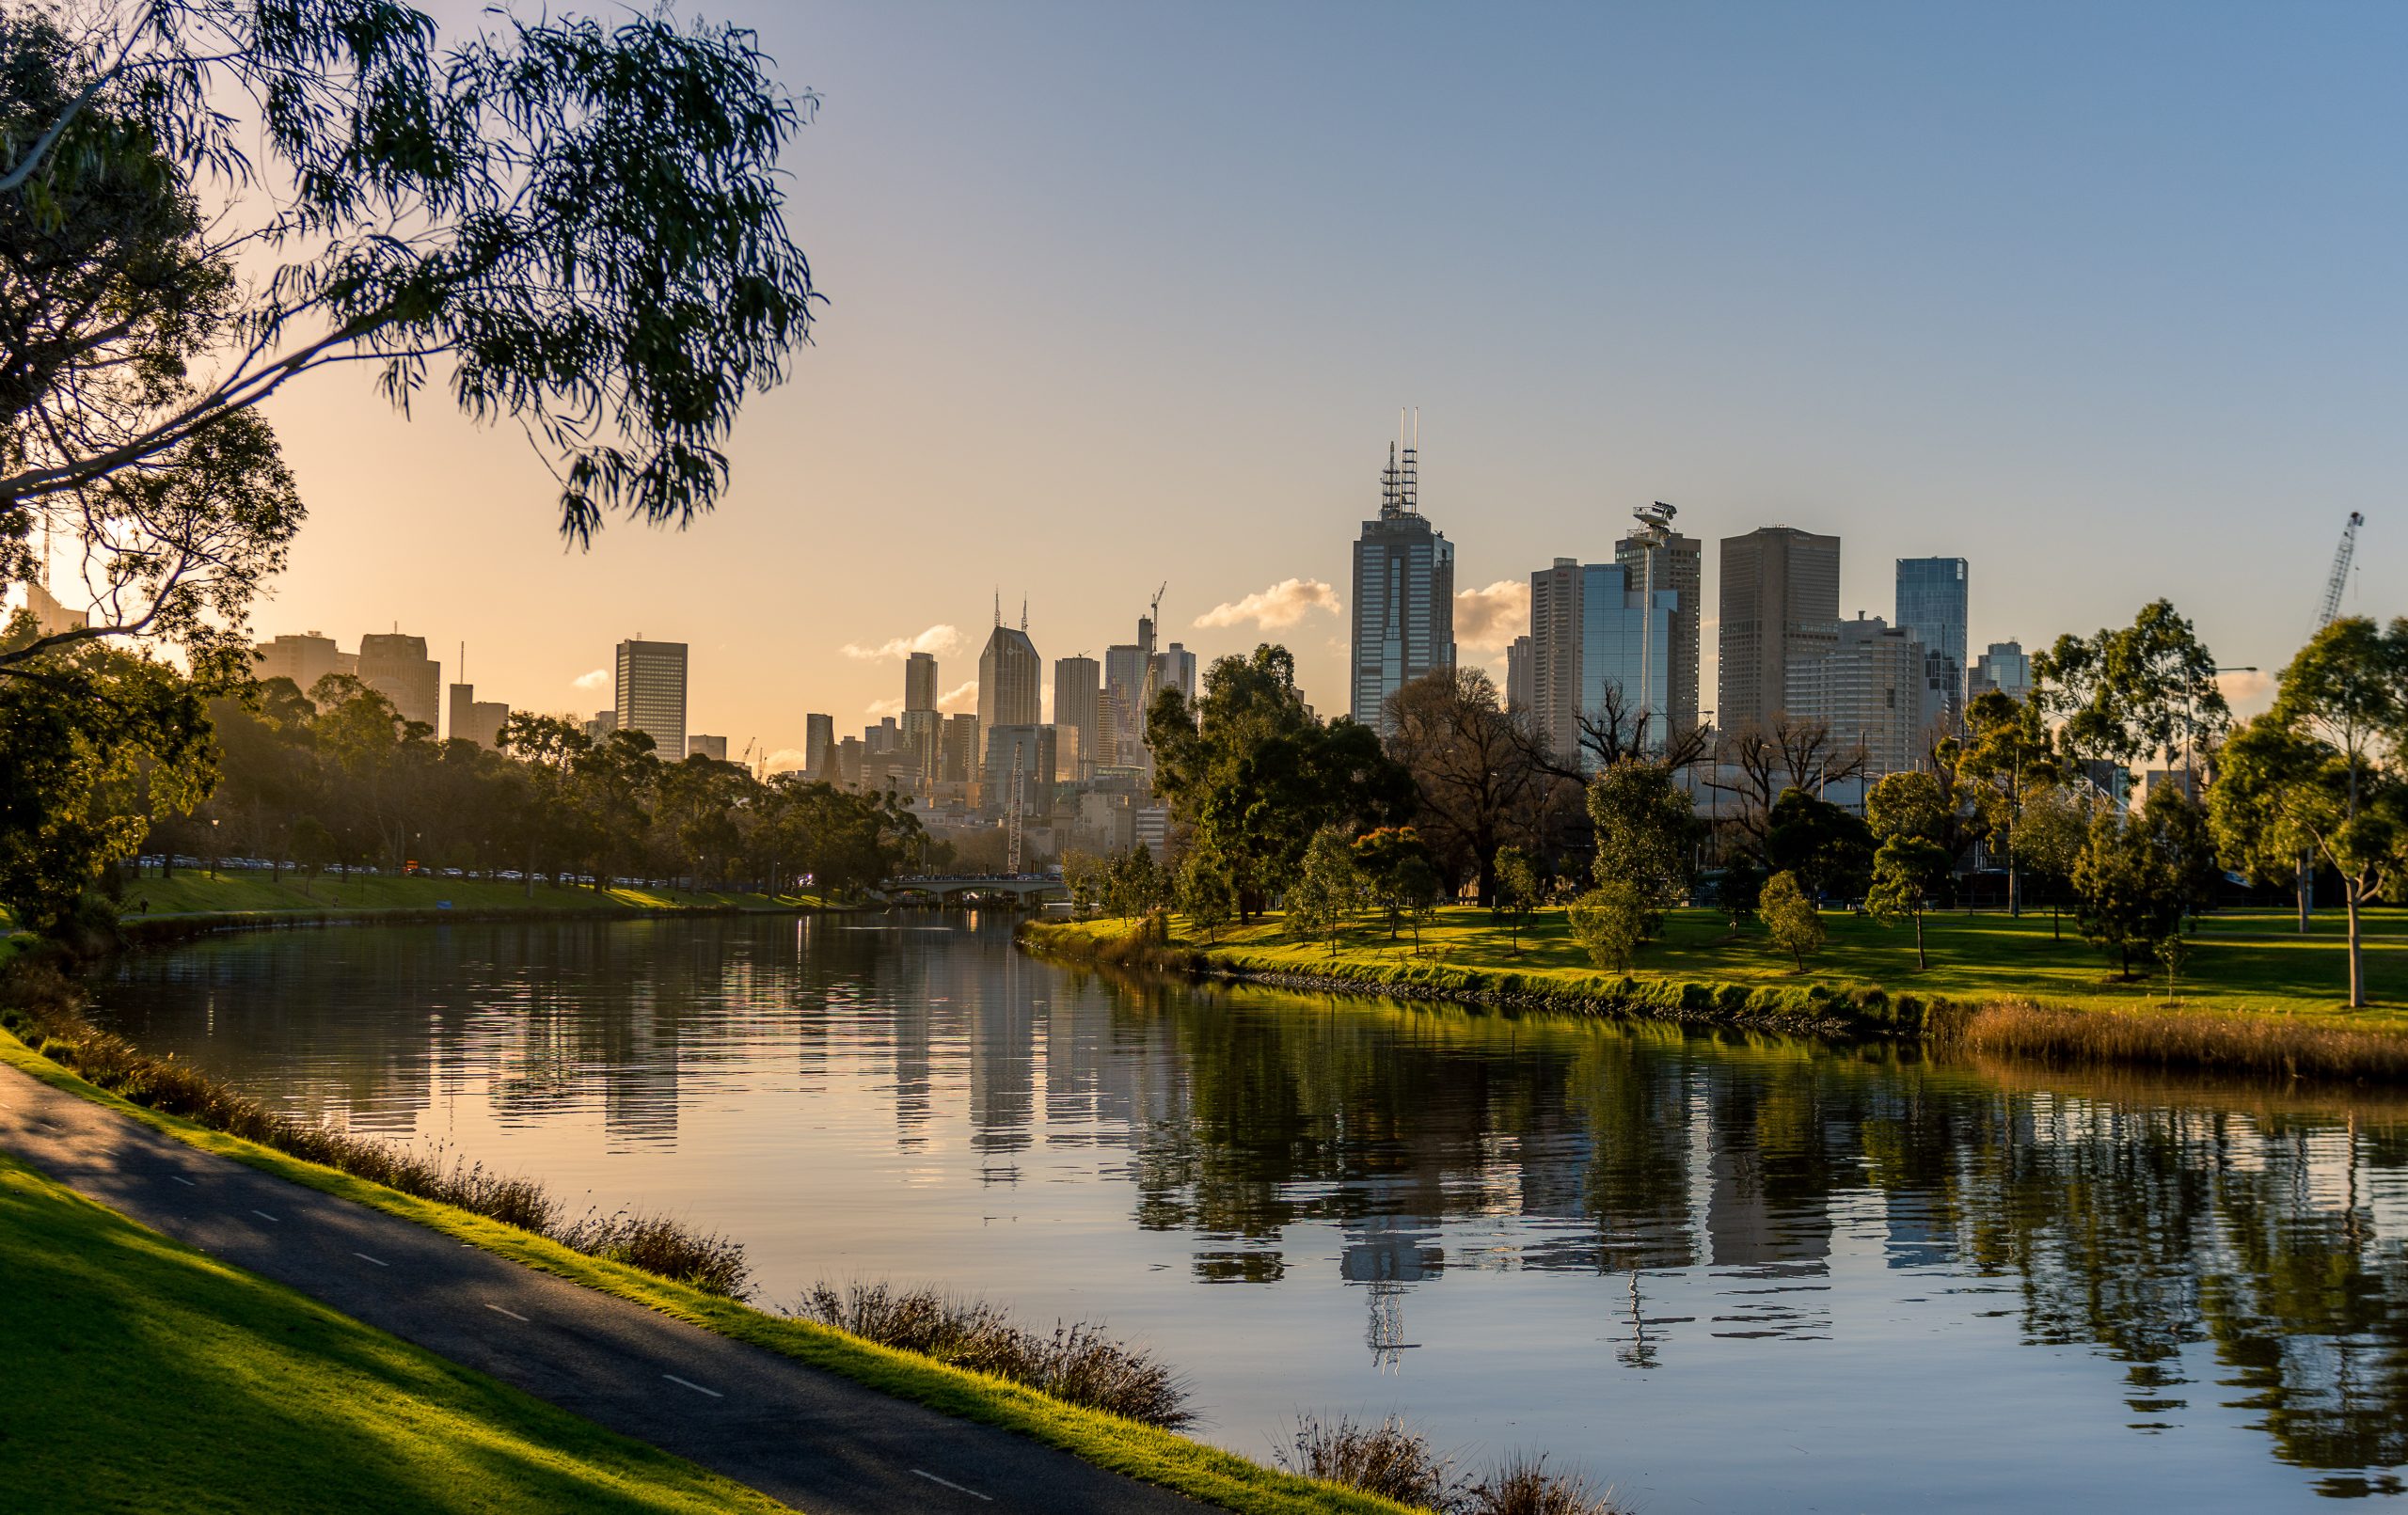 The Yarra River with the Melbourne city skyline in the background.